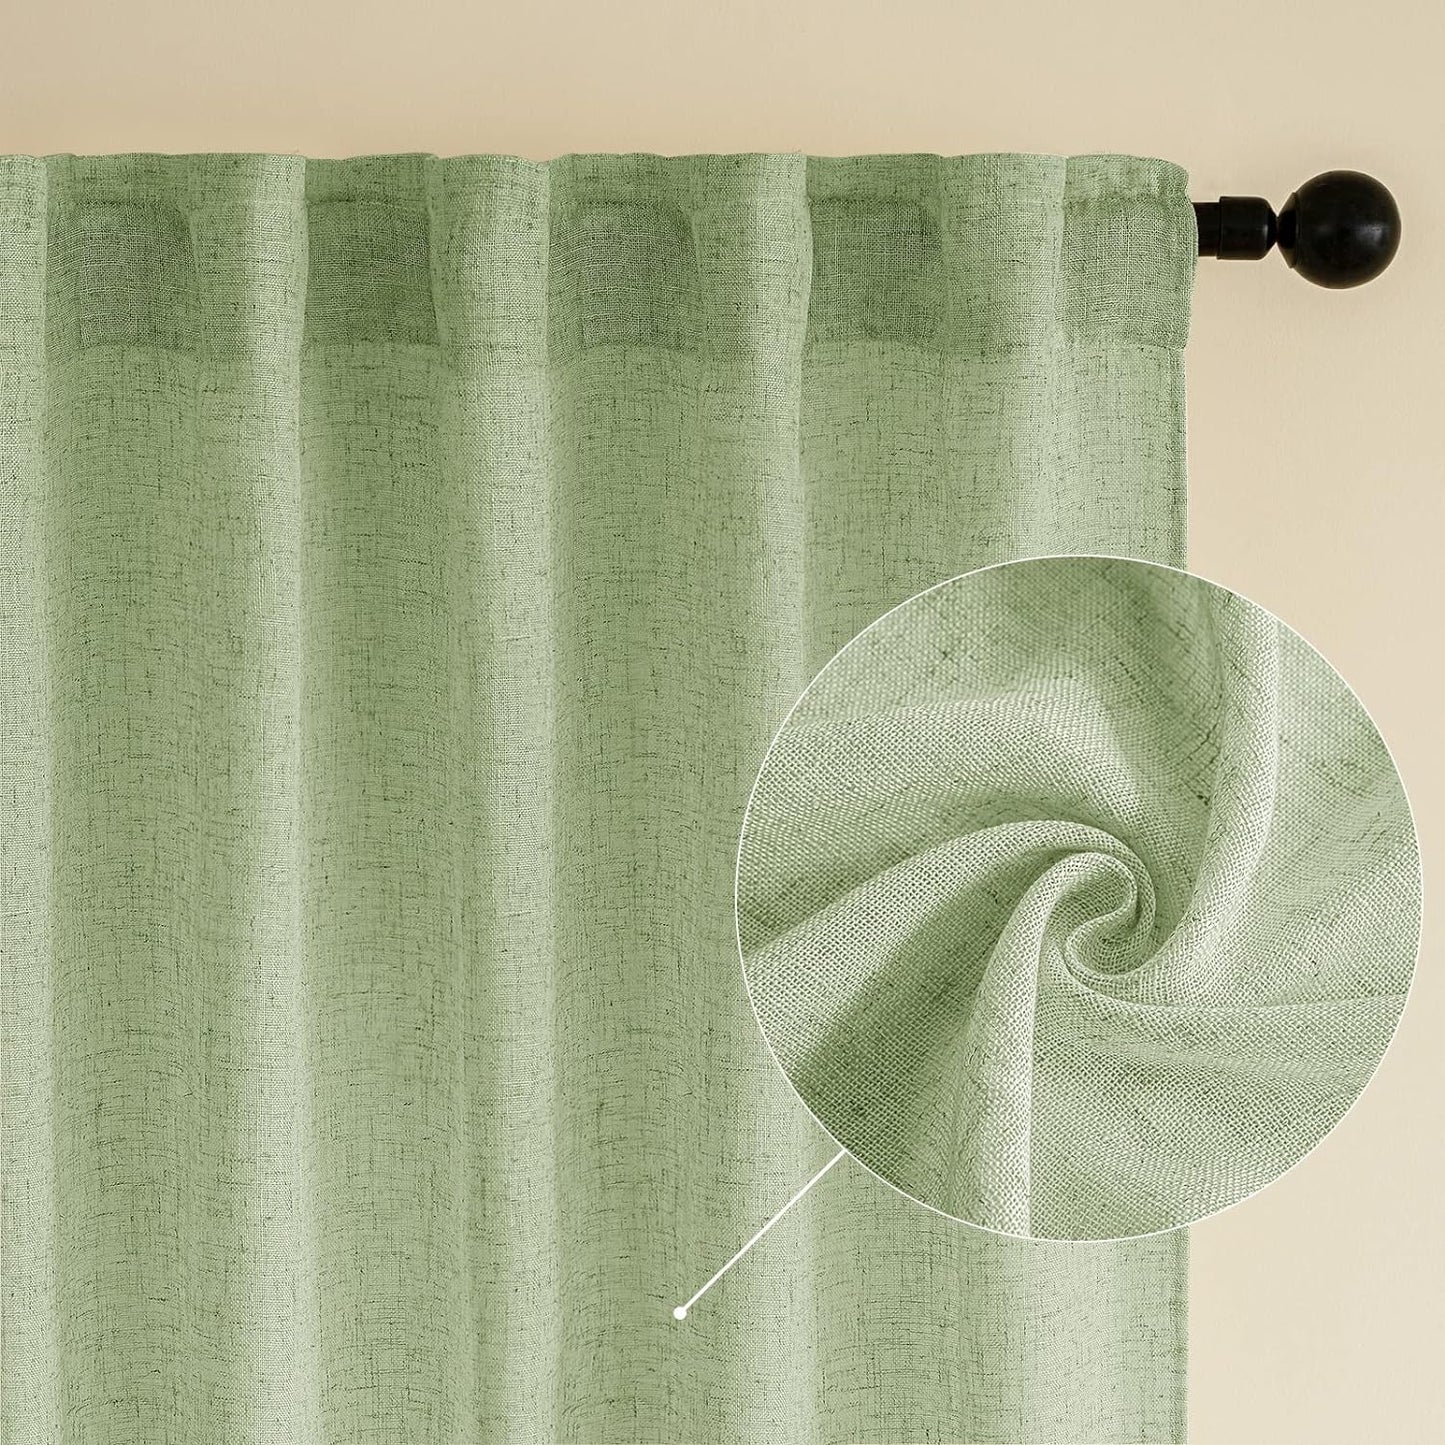 EMEMA Olive Green Velvet Curtains 84 Inch Length 2 Panels Set, Room Darkening Luxury Curtains, Grommet Thermal Insulated Drapes, Window Curtains for Living Room, W52 X L84, Olive Green  EMEMA Linen / Sage Green W52" X L96" 